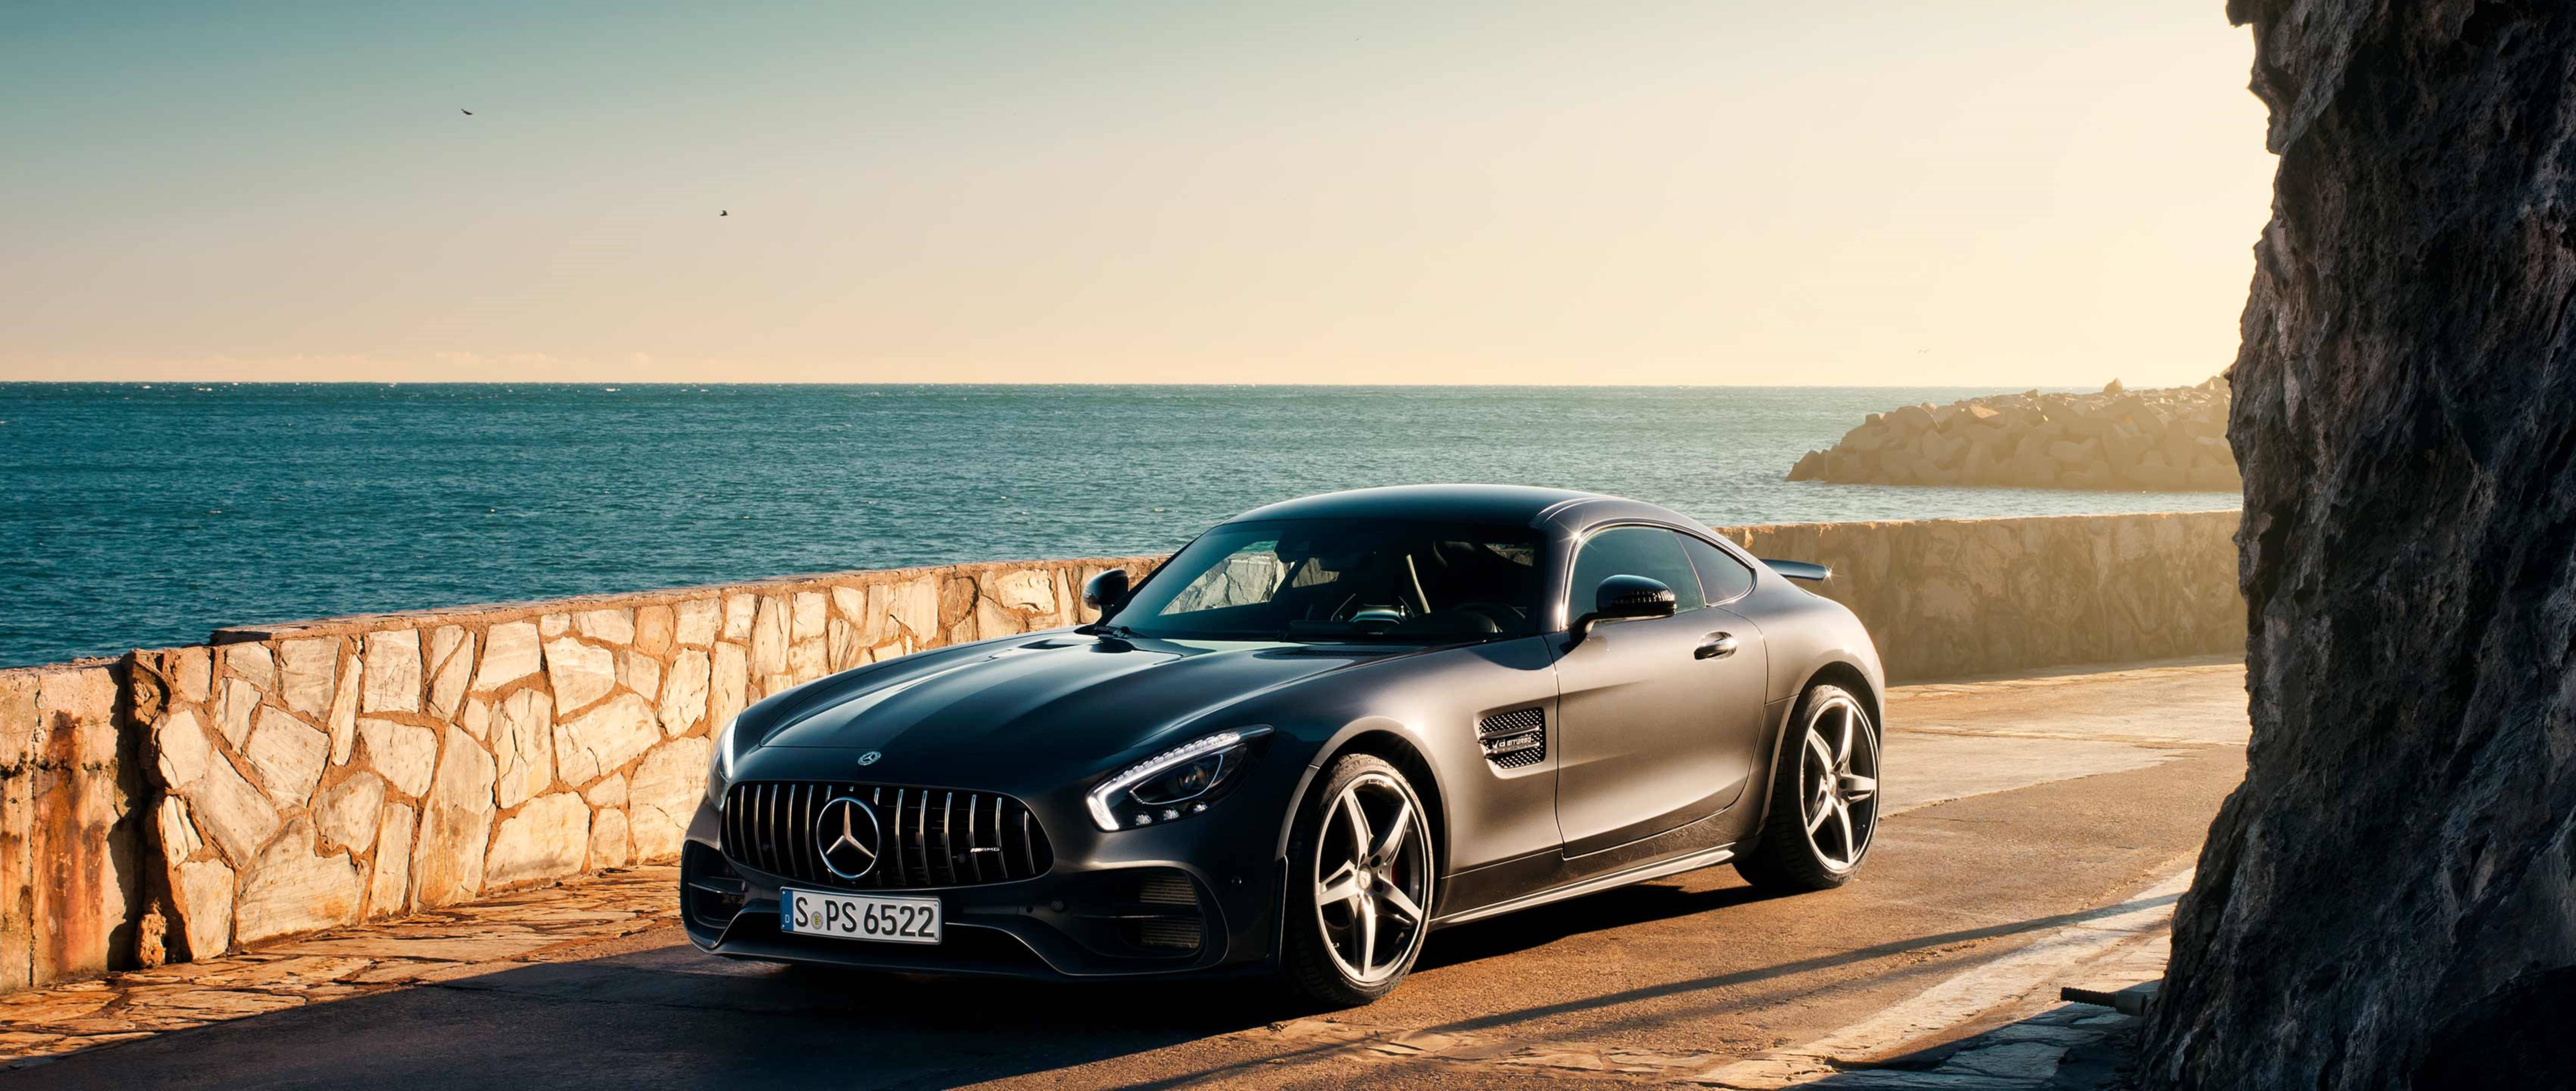 Sharp And Luxurious - Mercedes Amg On Open 4k Road By The Breathtaking Sea Side View. Wallpaper